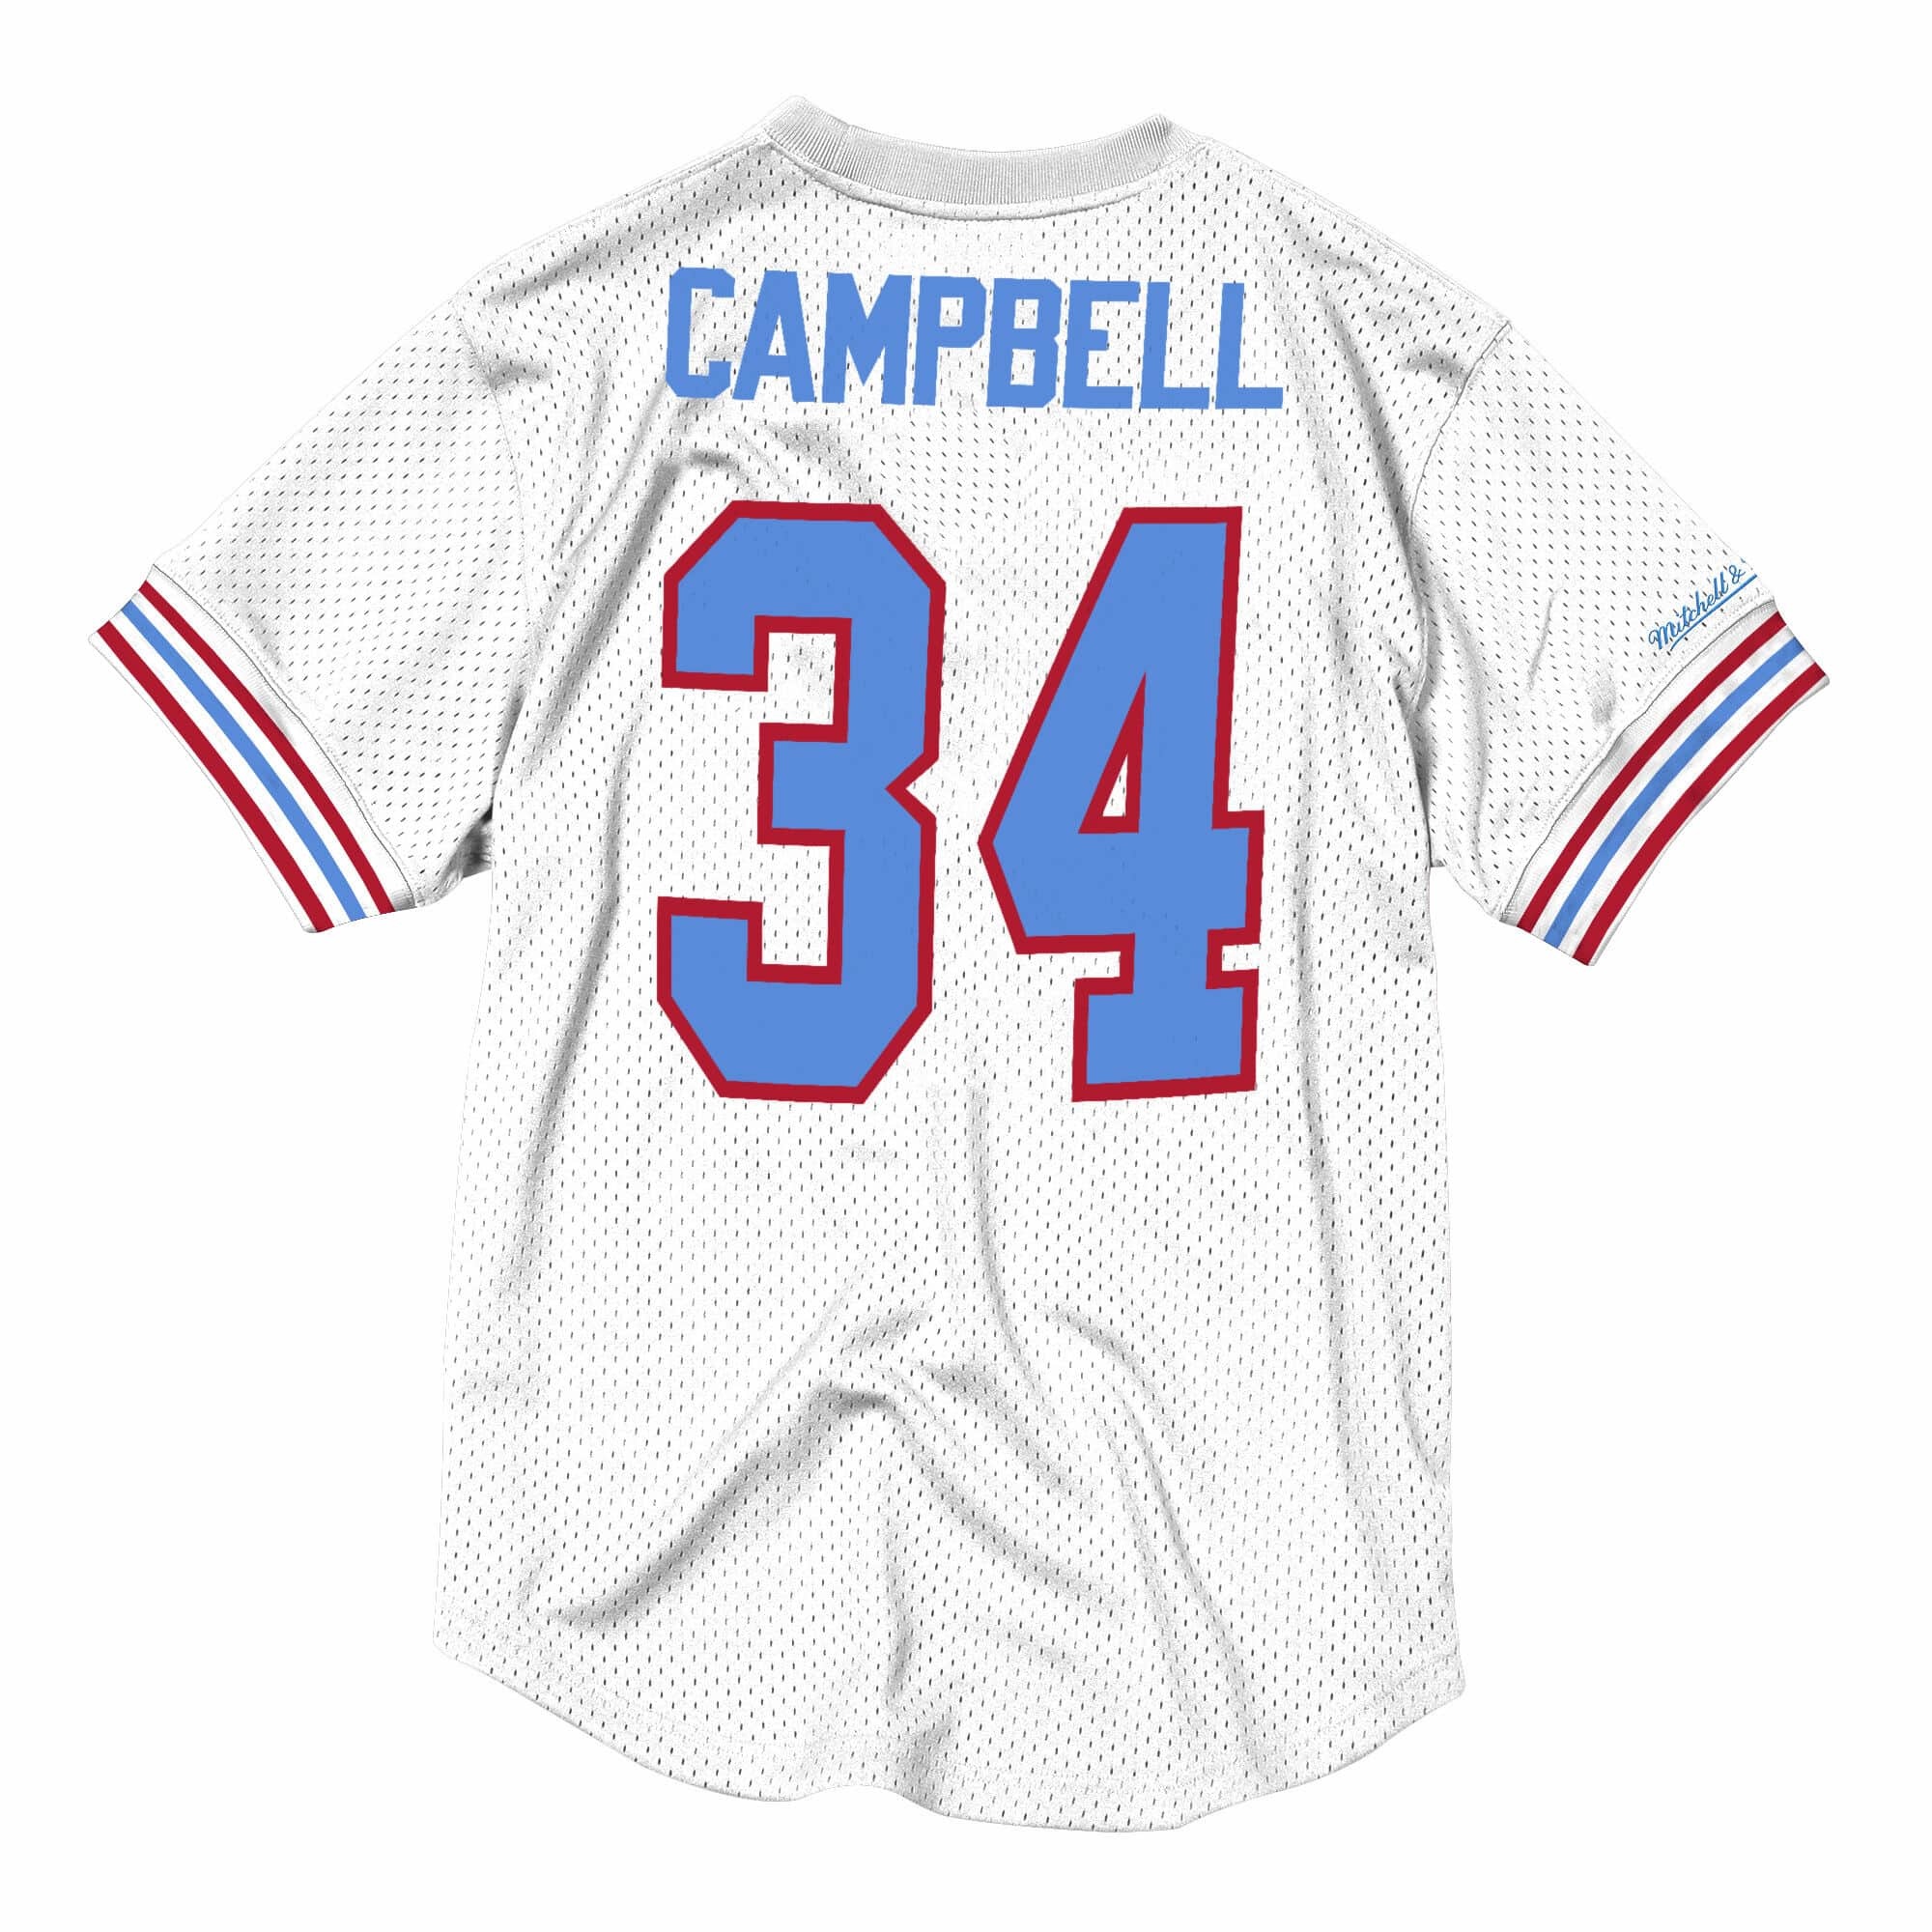 Men's Mitchell & Ness Earl Campbell White Houston Oilers Name Number Retired Player Mesh Top Size: Medium